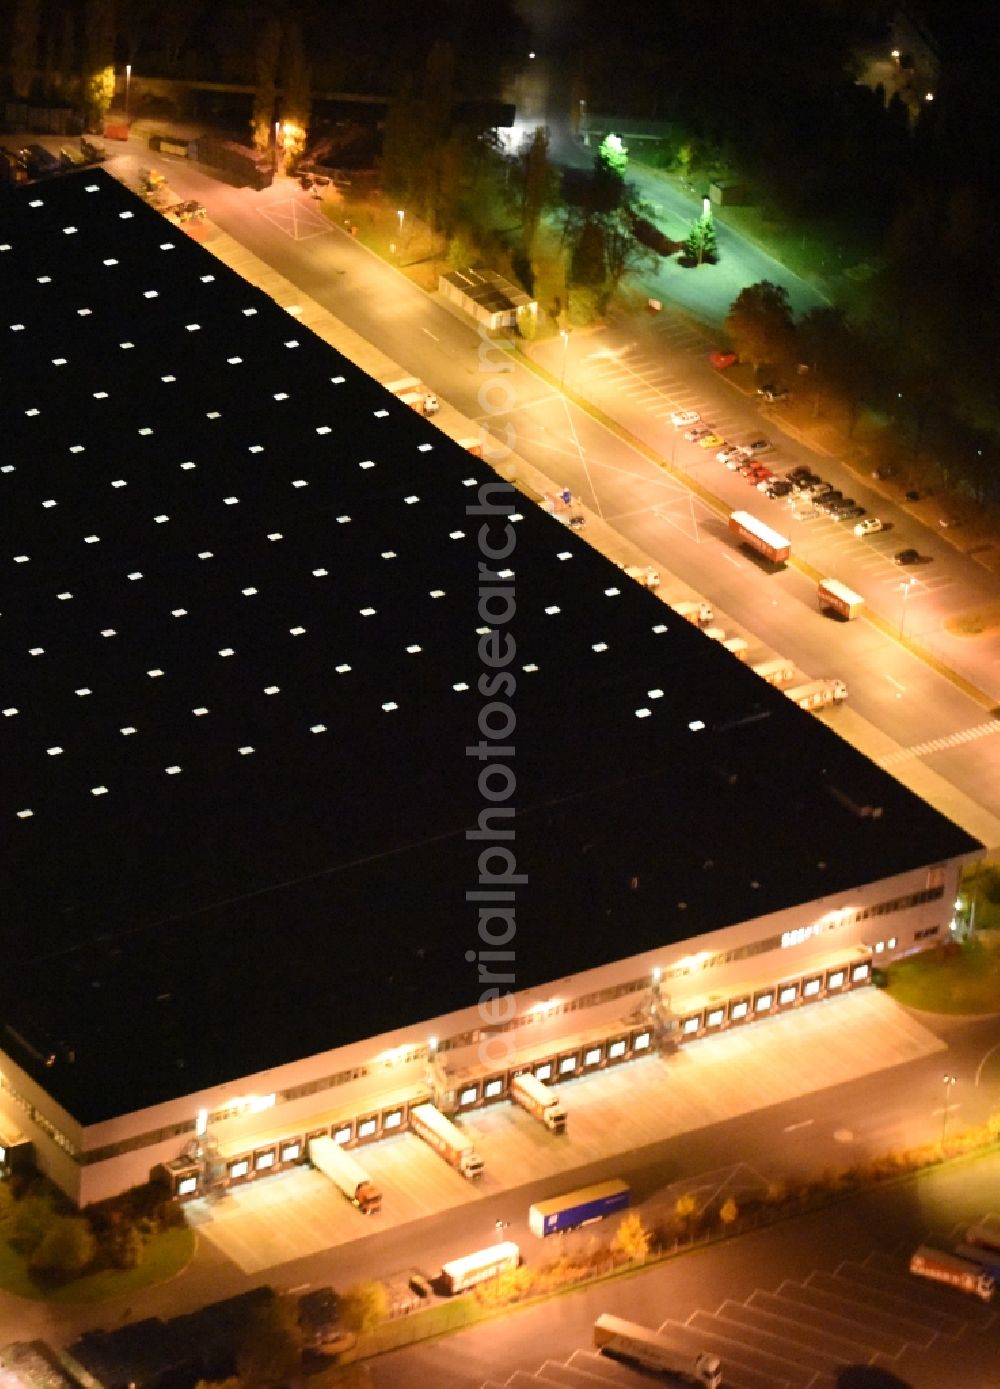 Aerial photograph at night Berlin - Night aerial image of the building complex and grounds of the logistics center of Kaiser's Tengelmann AG in the district of Tempelhof-Schoeneberg in Berlin in Germany. The illuminated hall is located on Ringstrasse